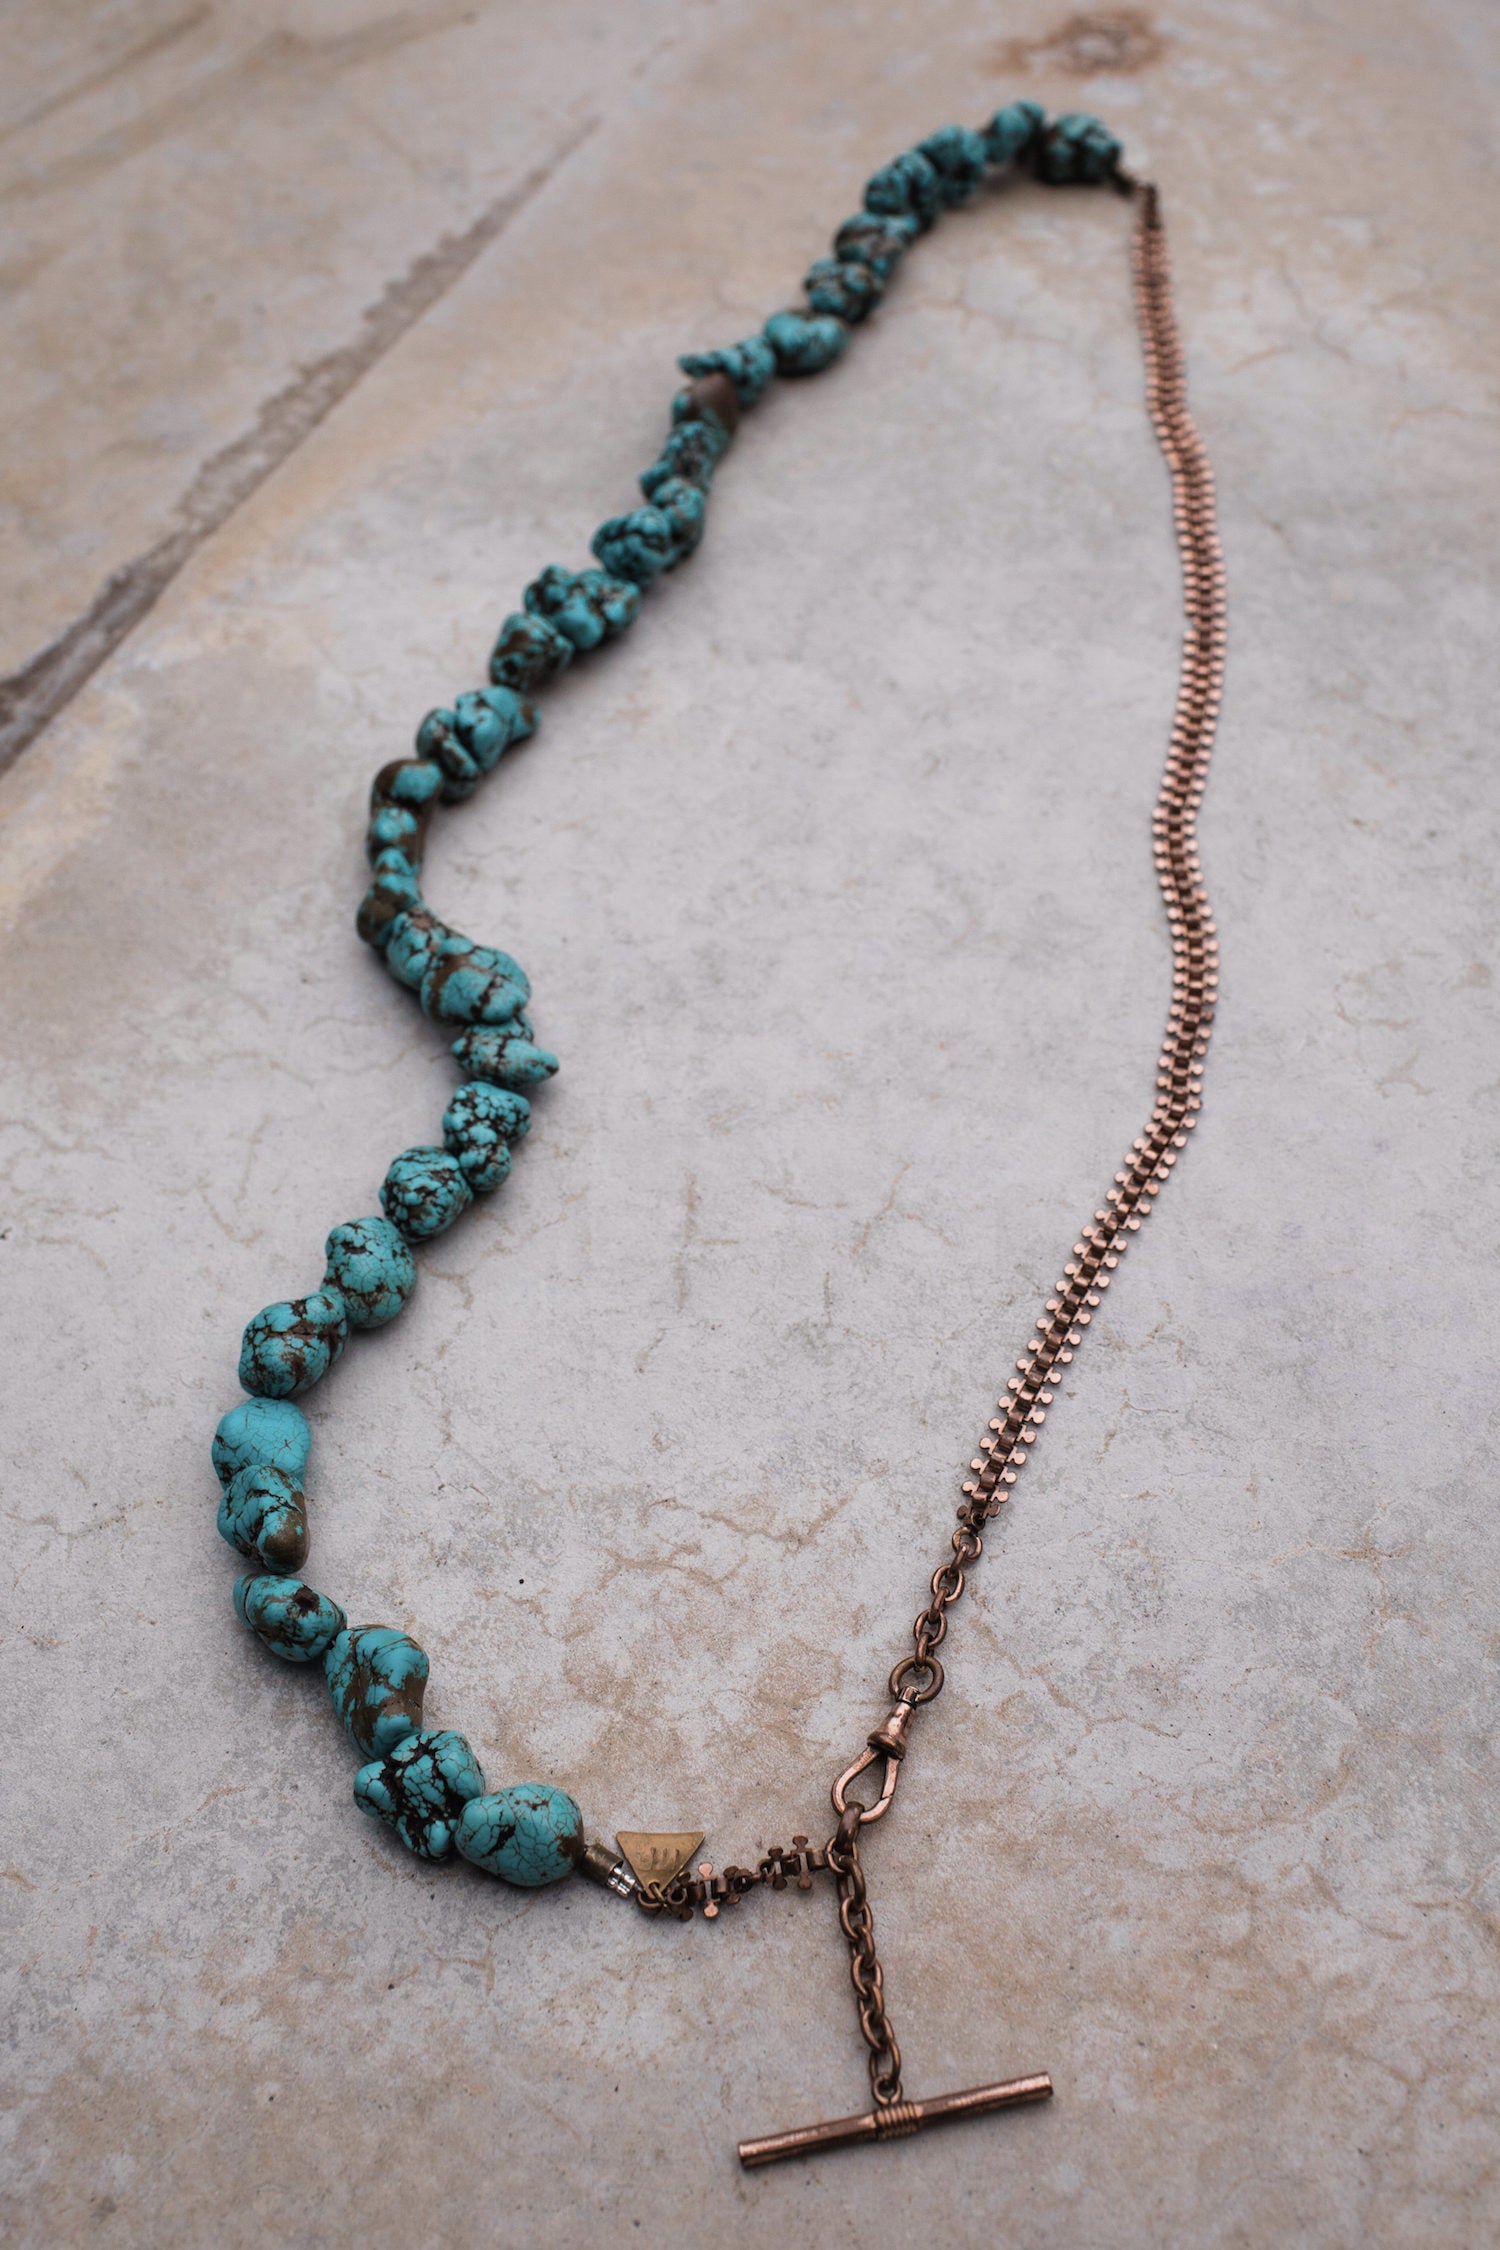 Turquoise Antique Copper Pocket Watch Chain Necklace